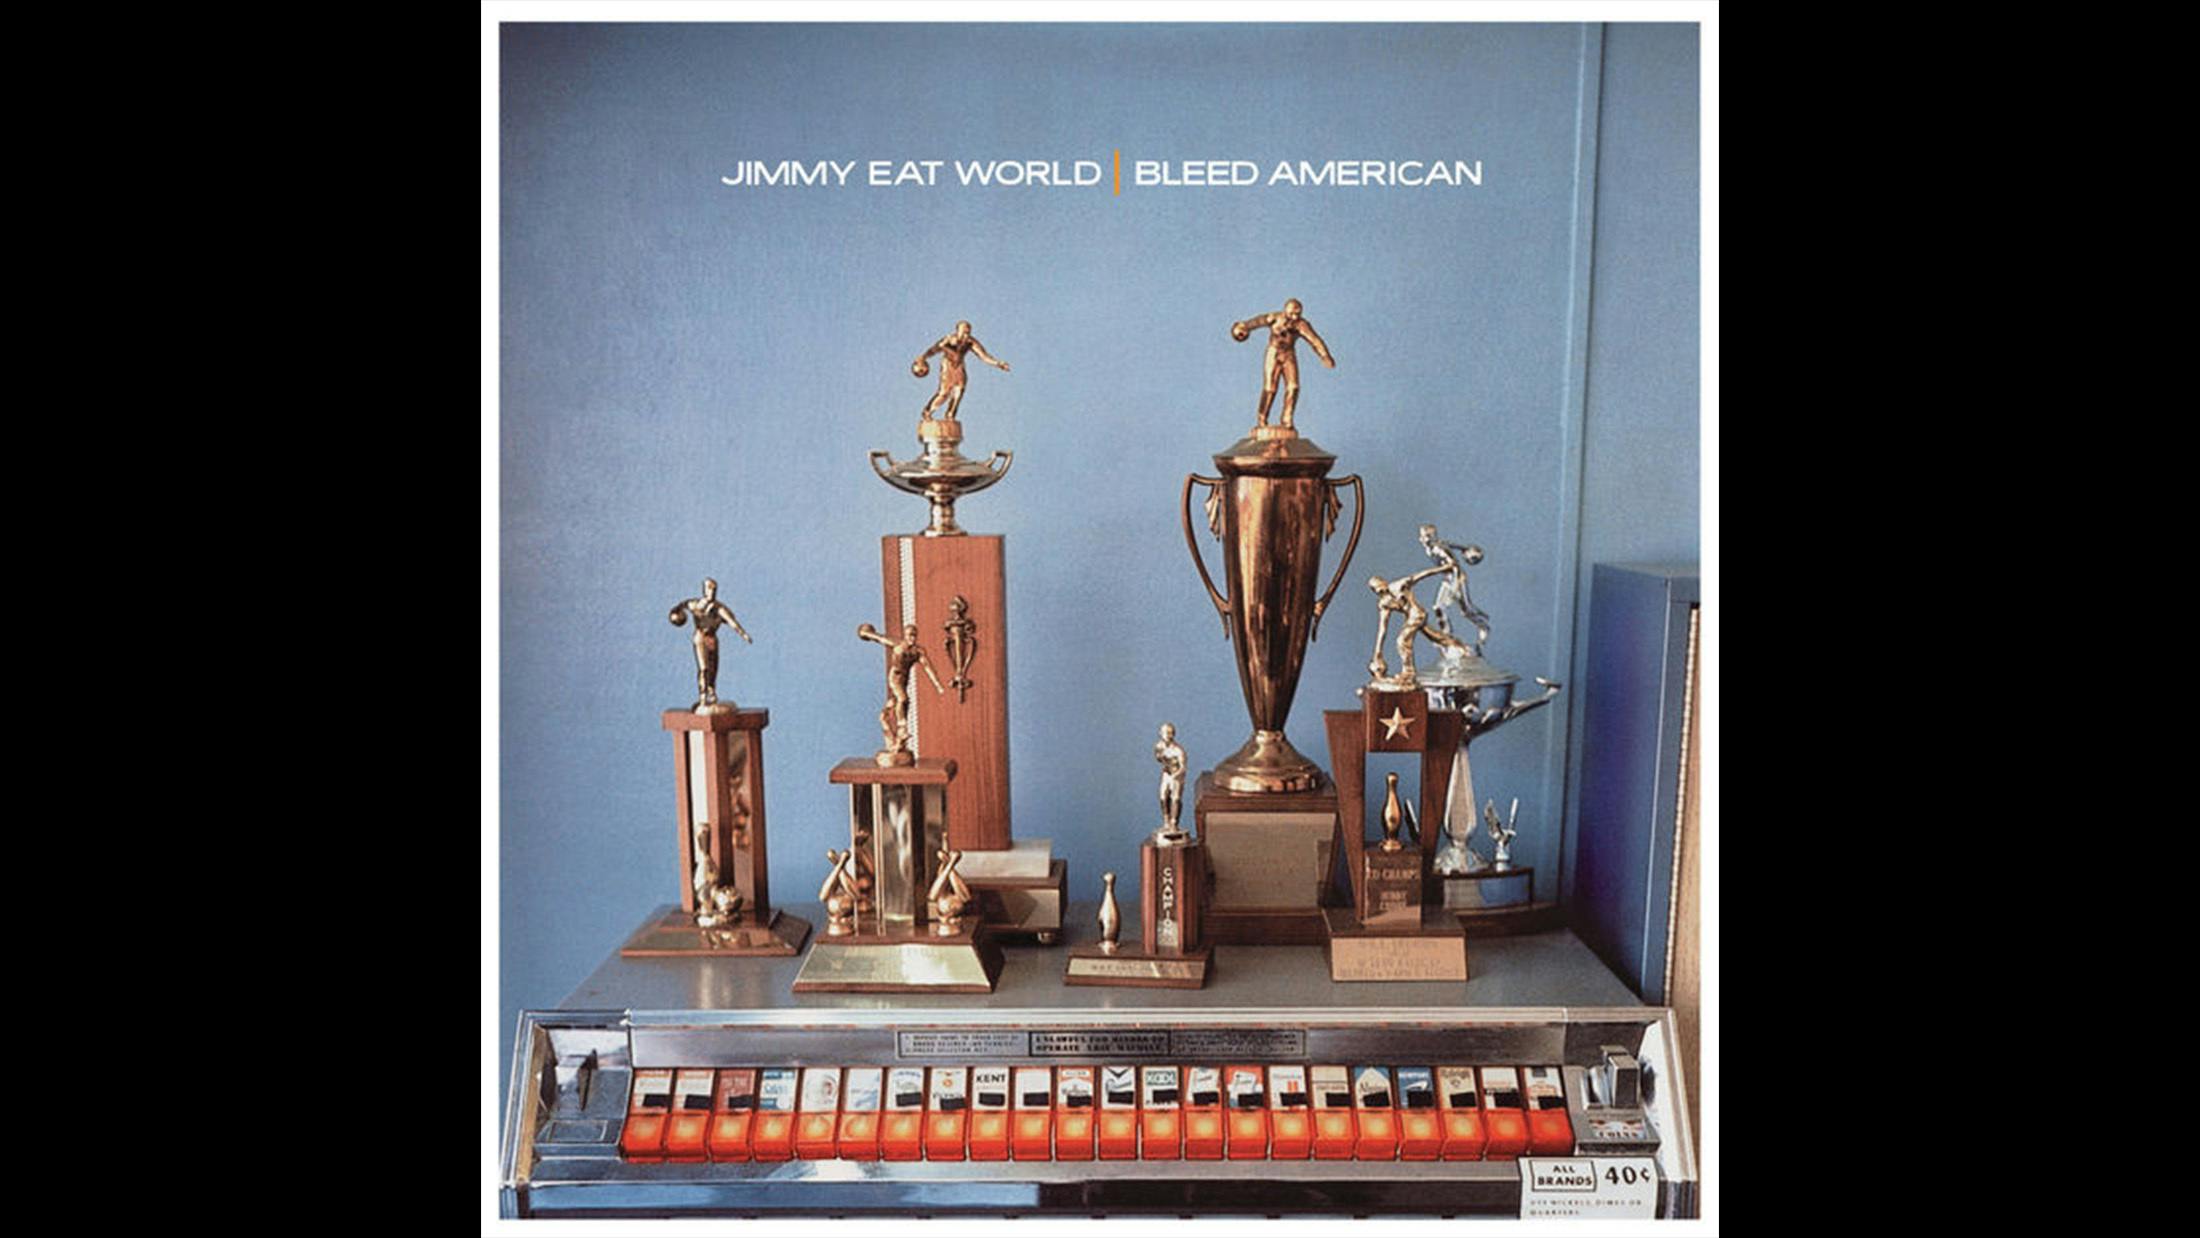 Prior to Bleed American, emo was less a mainstream-bothering phenomenon and more a minority interest club. Jimmy Eat World changed all that with a magnificent fourth album that blended heart-ripping lyrics with sweeping pop-punk sensibilities, not to mention a genuine smash hit single in The Middle.